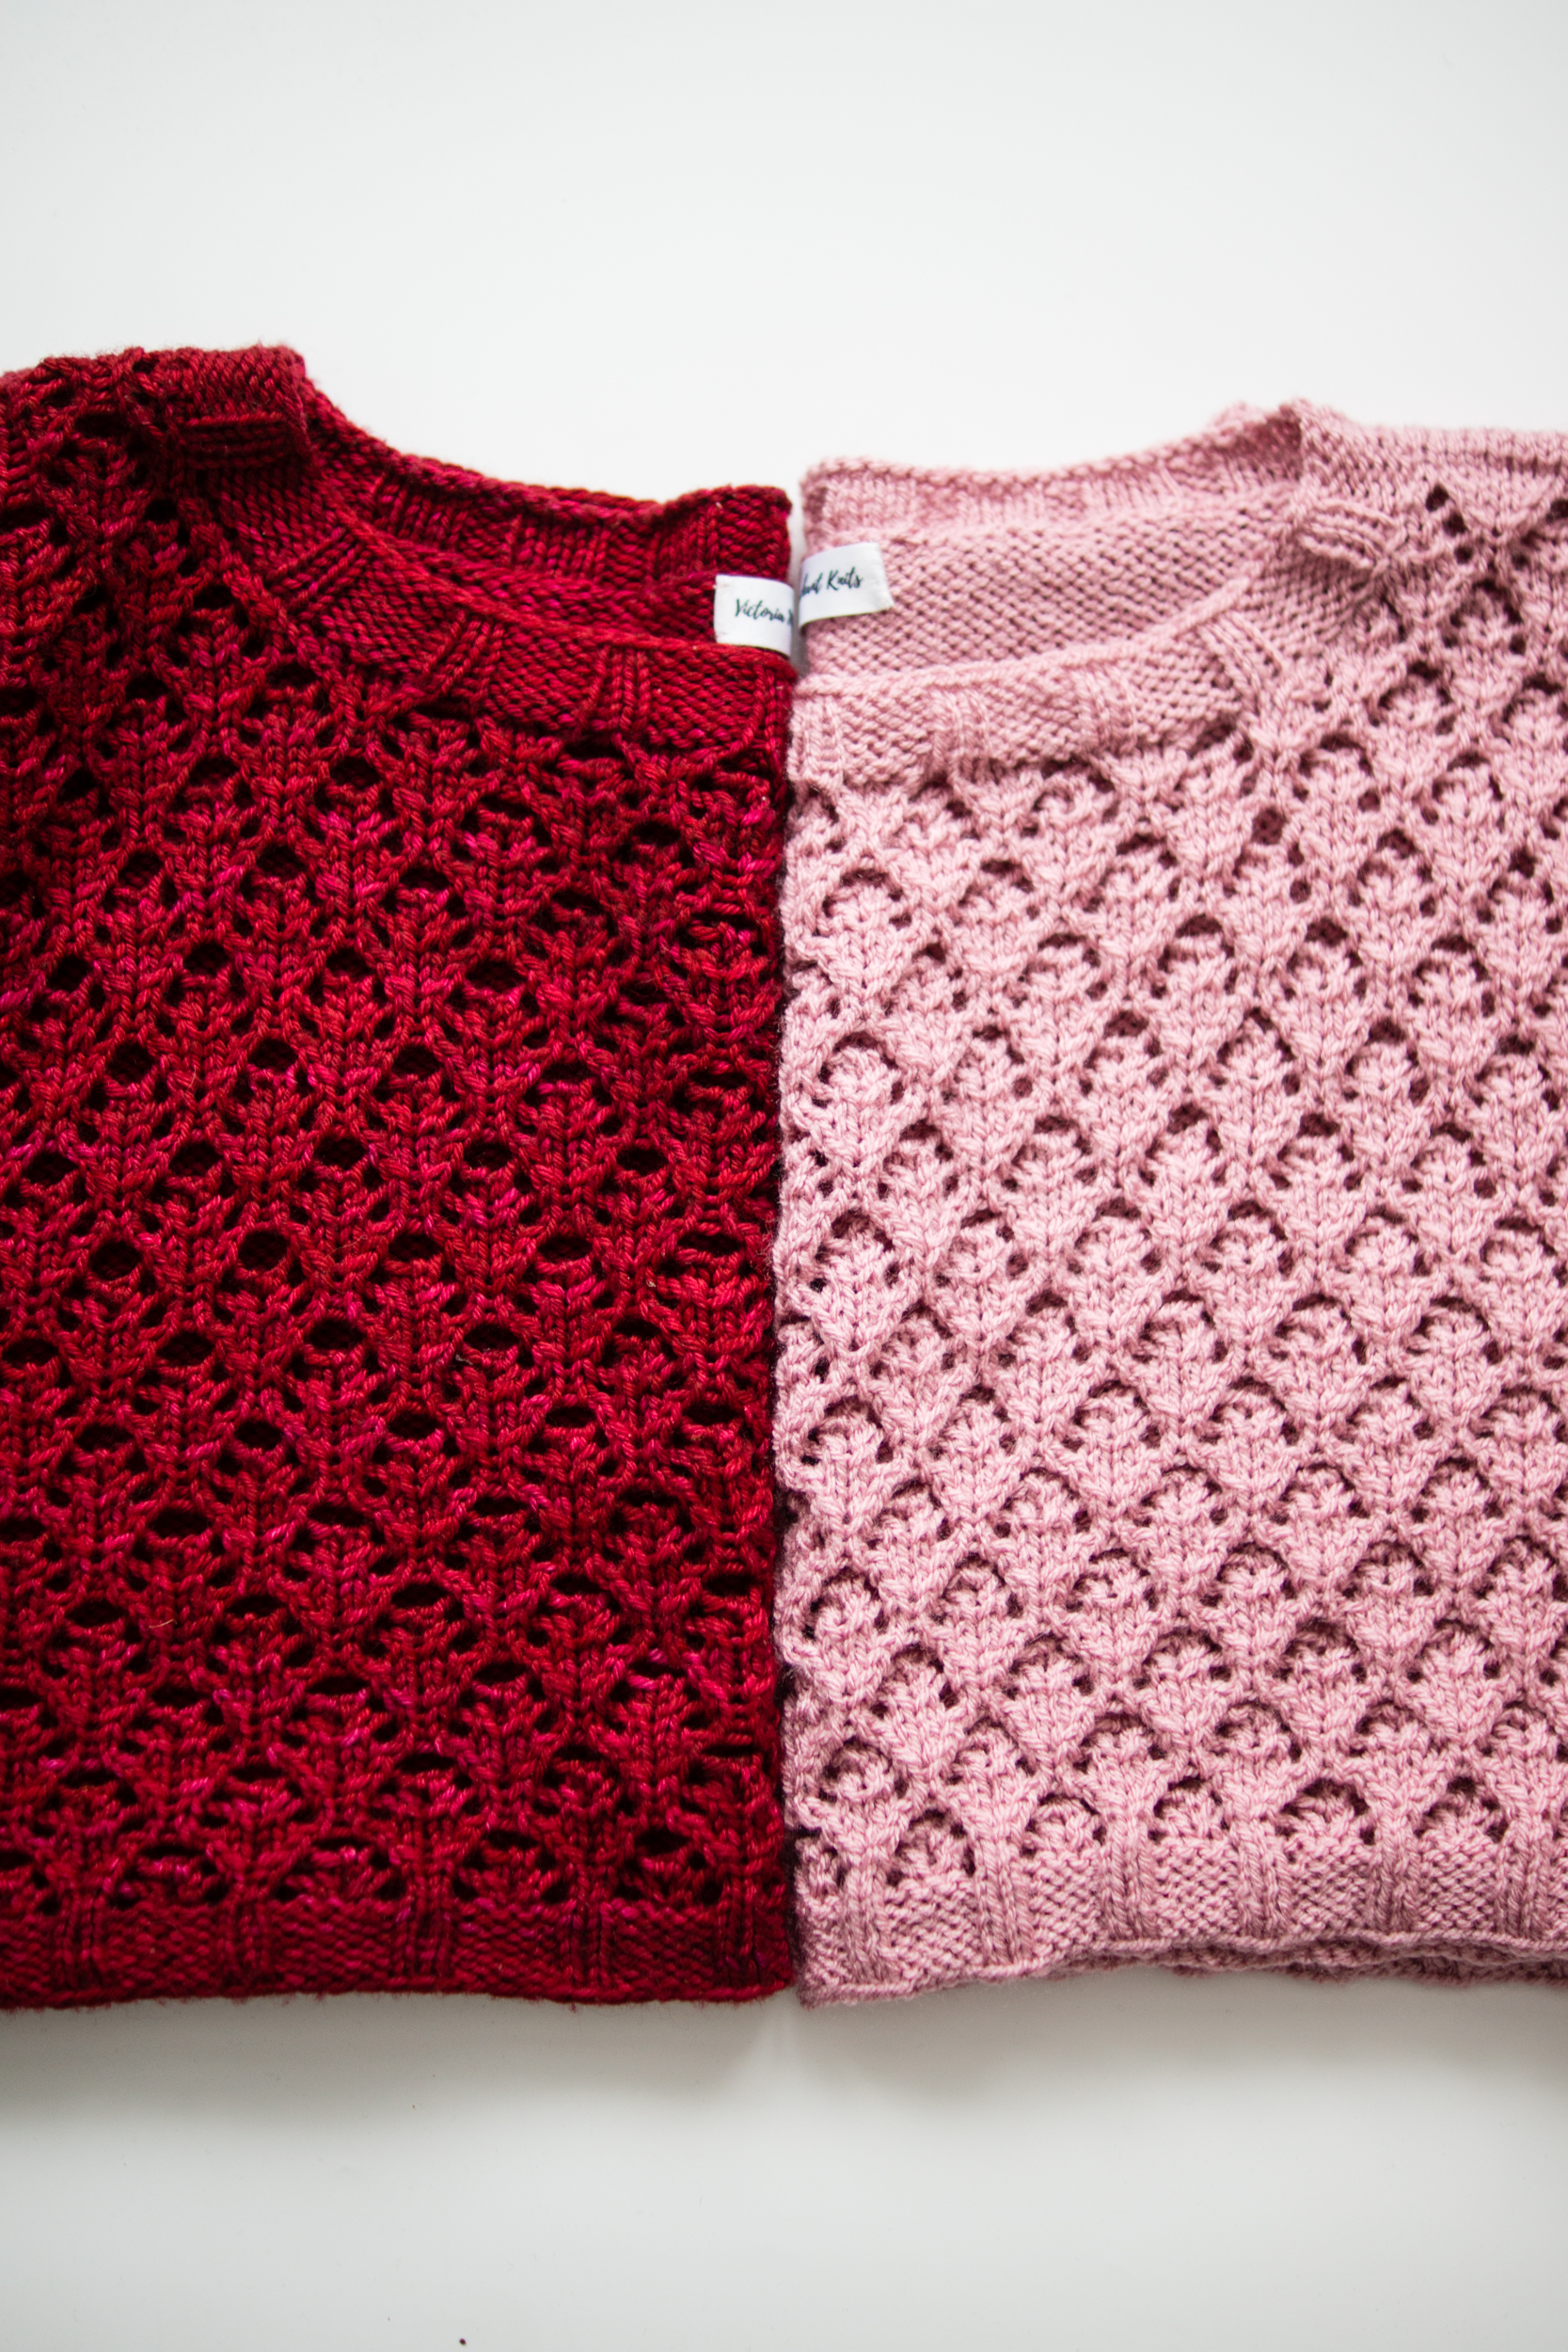 Roseability - Victoria Marchant Knits